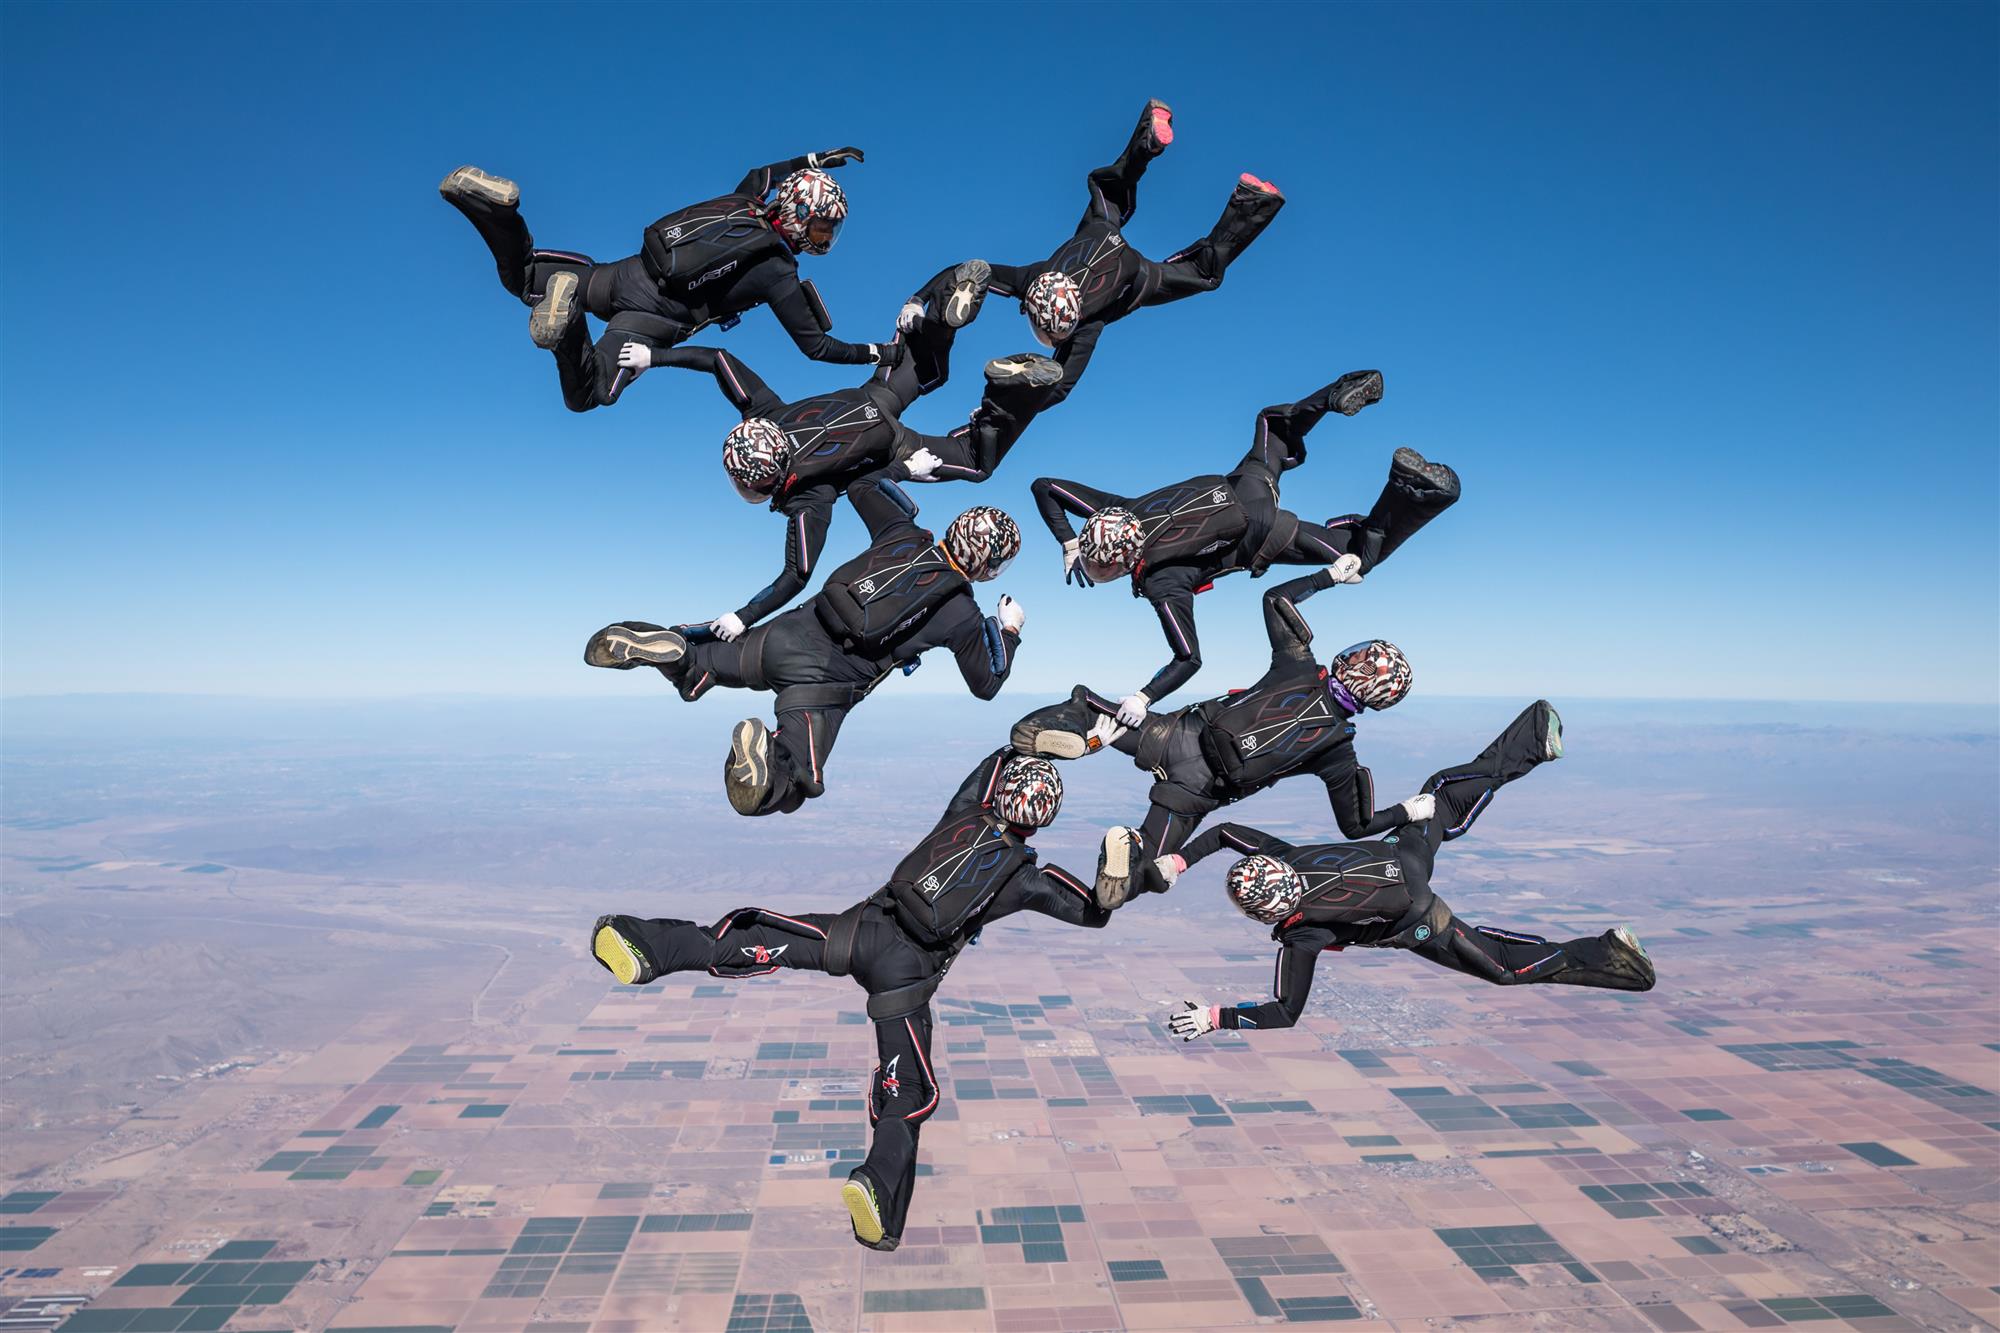 Skydiving Competition: There’s Still Time!